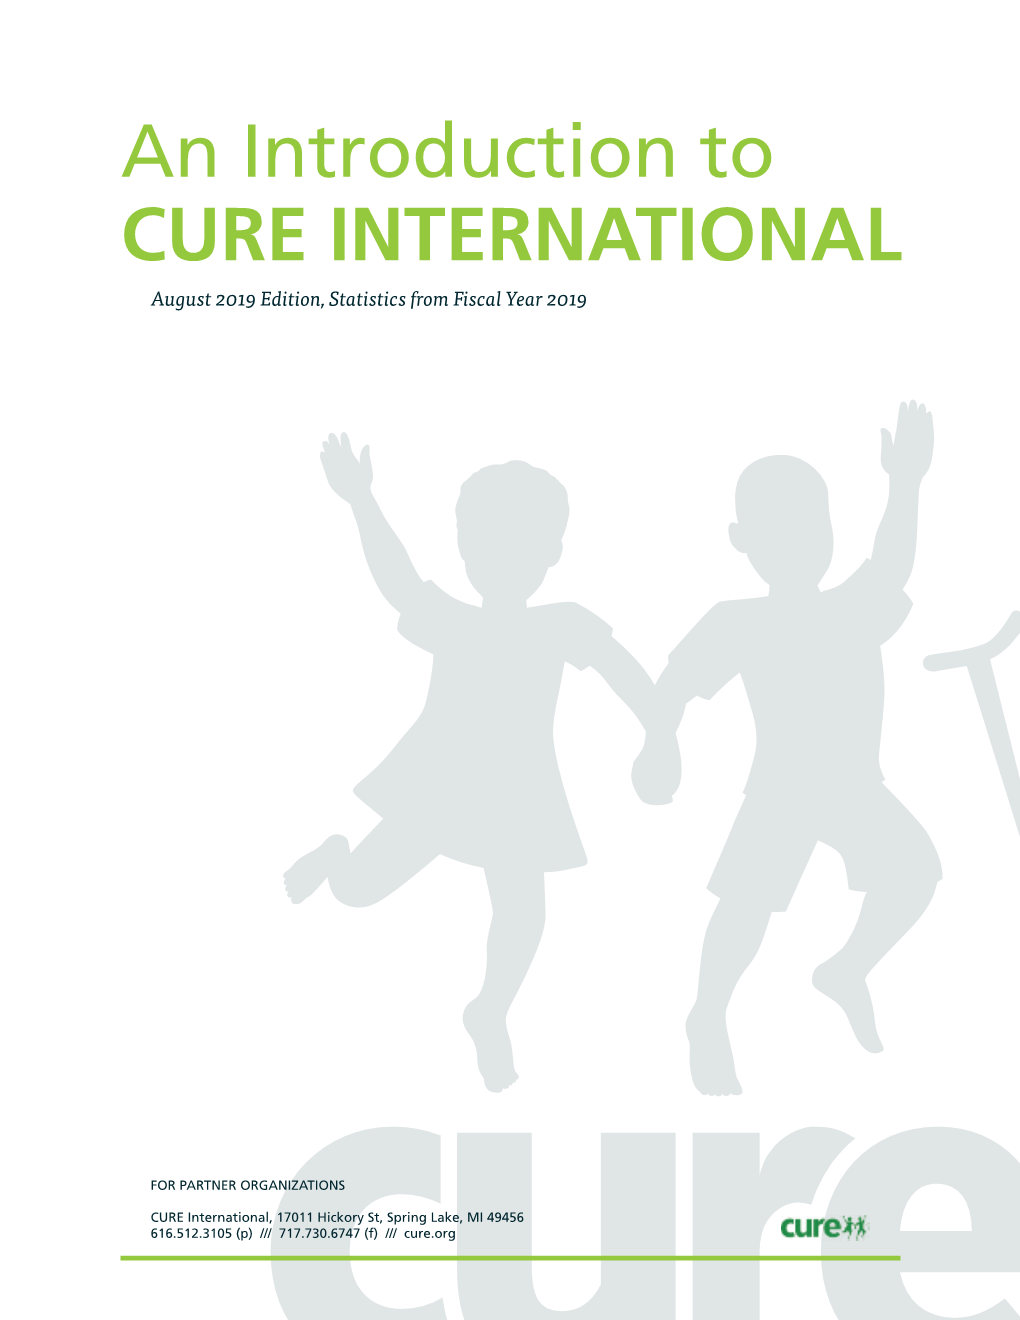 An Introduction to CURE INTERNATIONAL August 2019 Edition, Statistics from Fiscal Year 2019